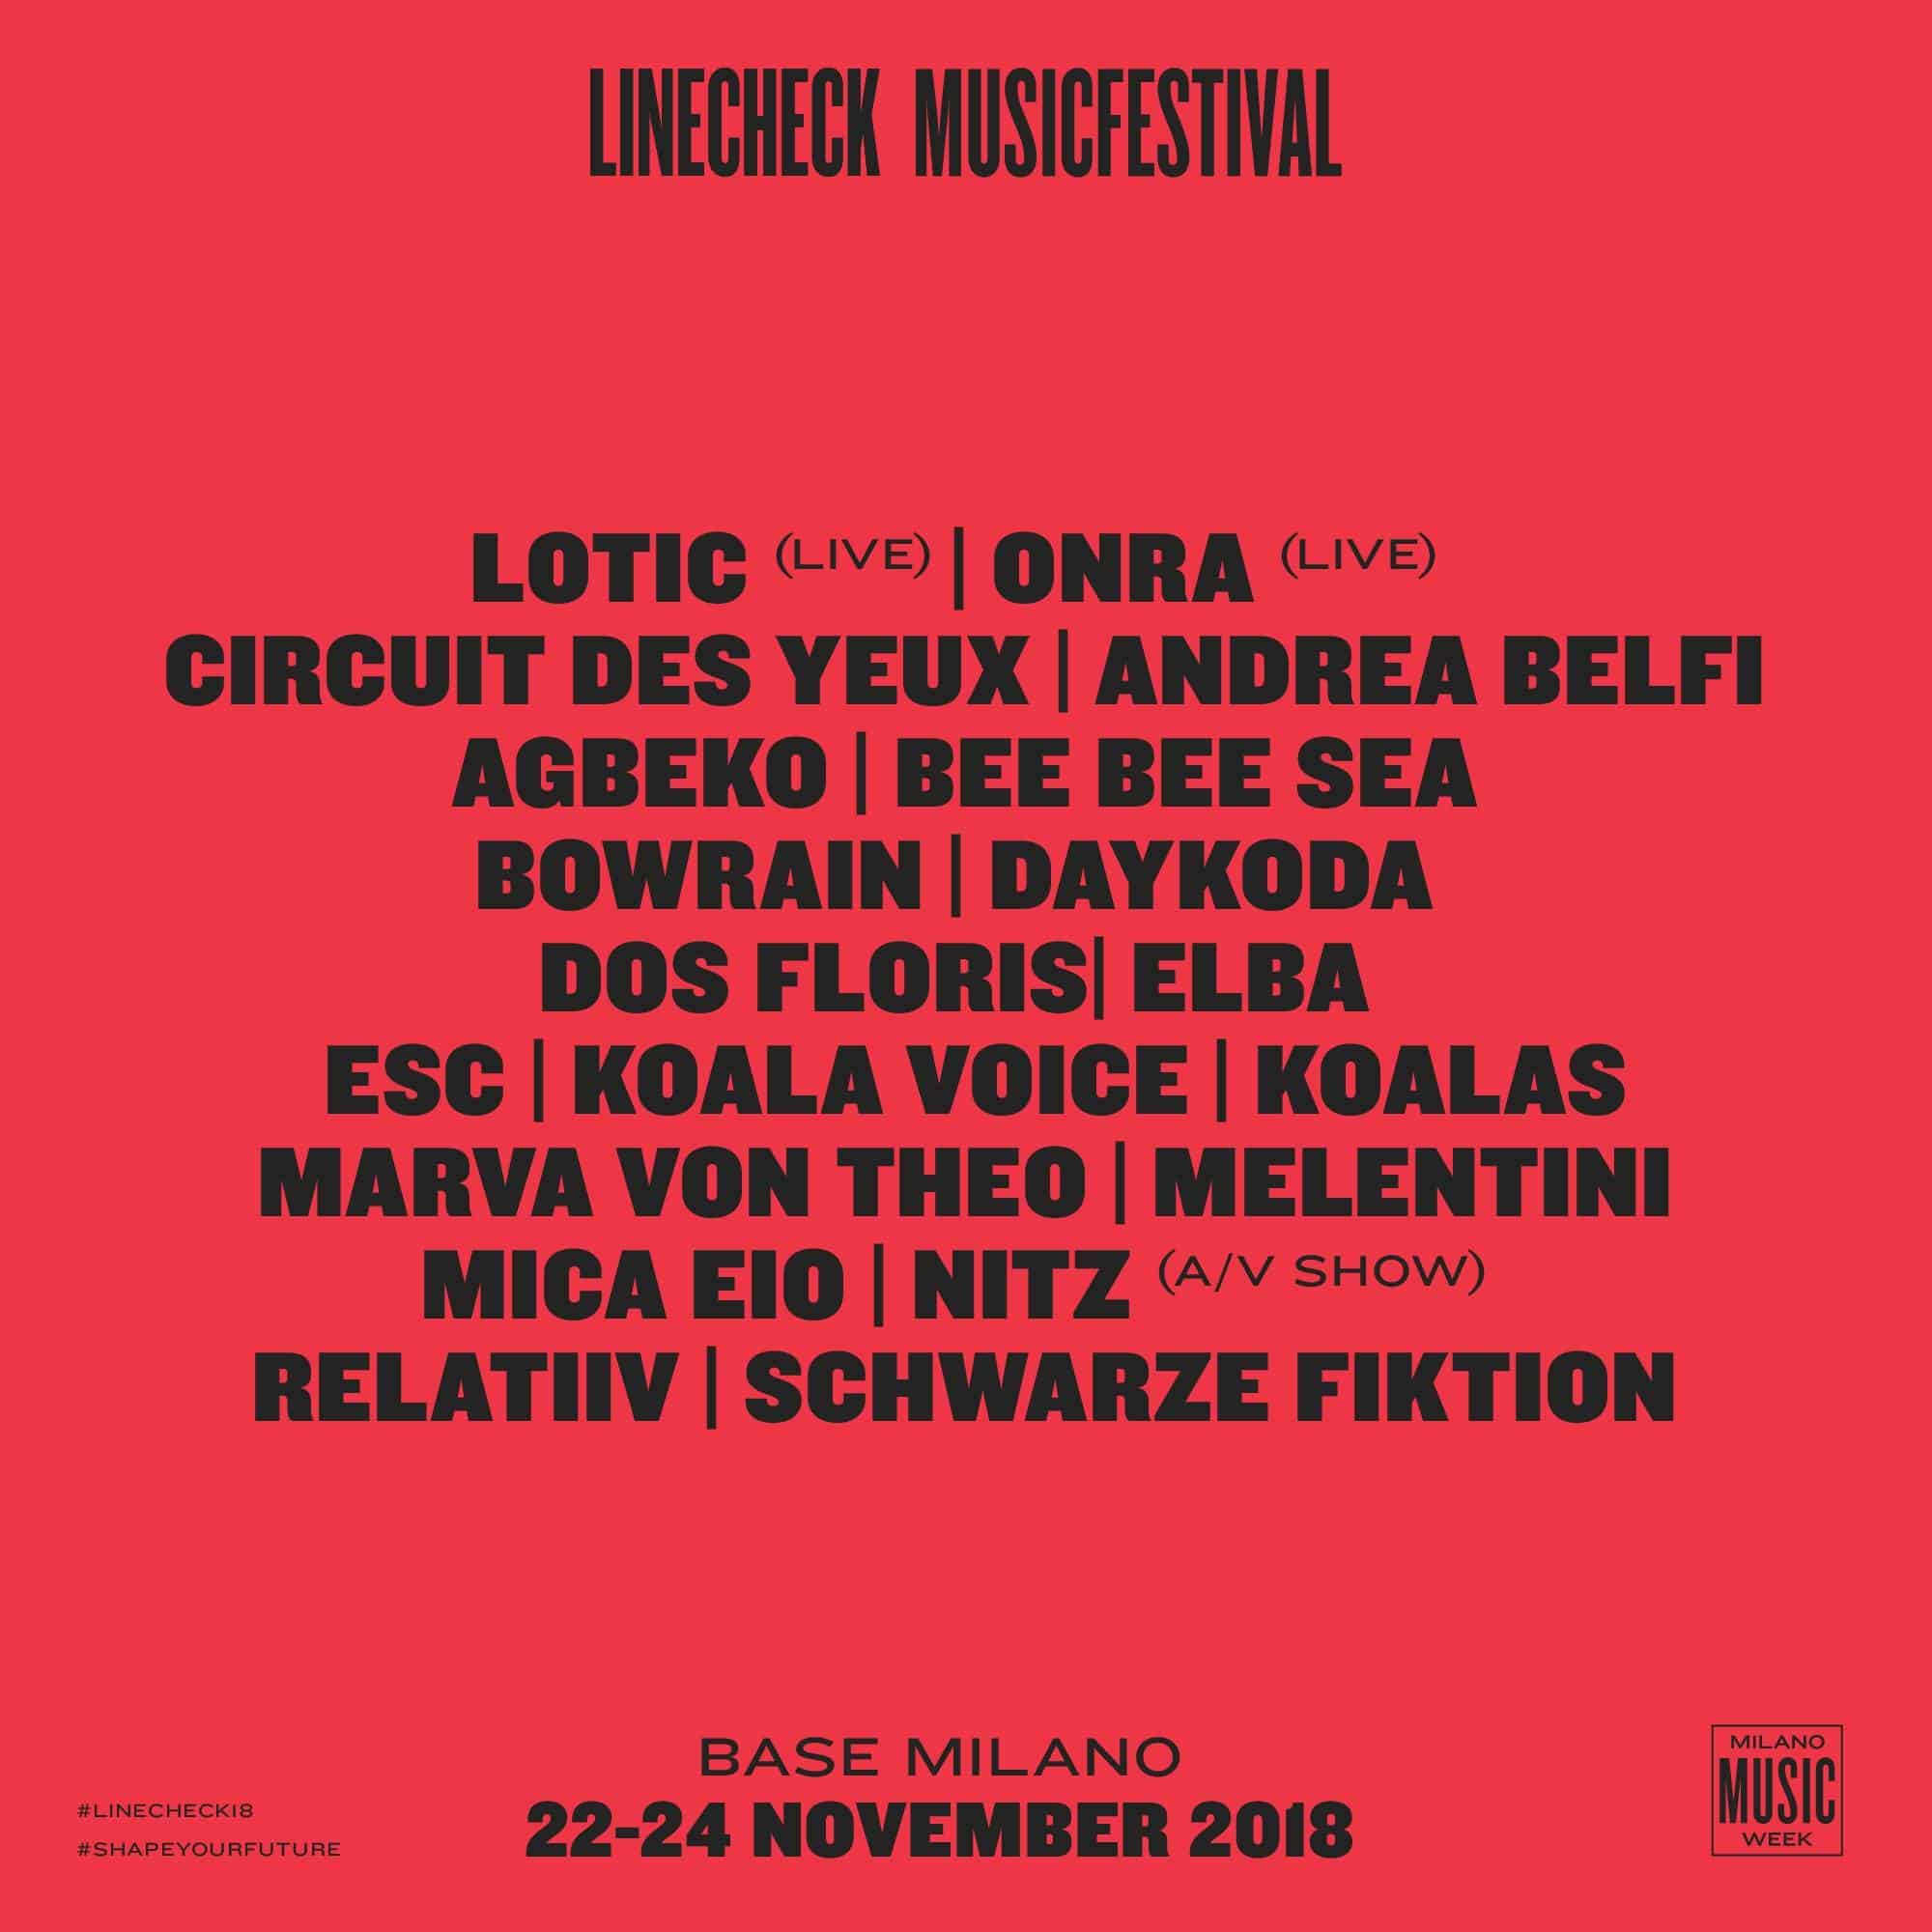 Linecheck Music Meeting and Festival 2018